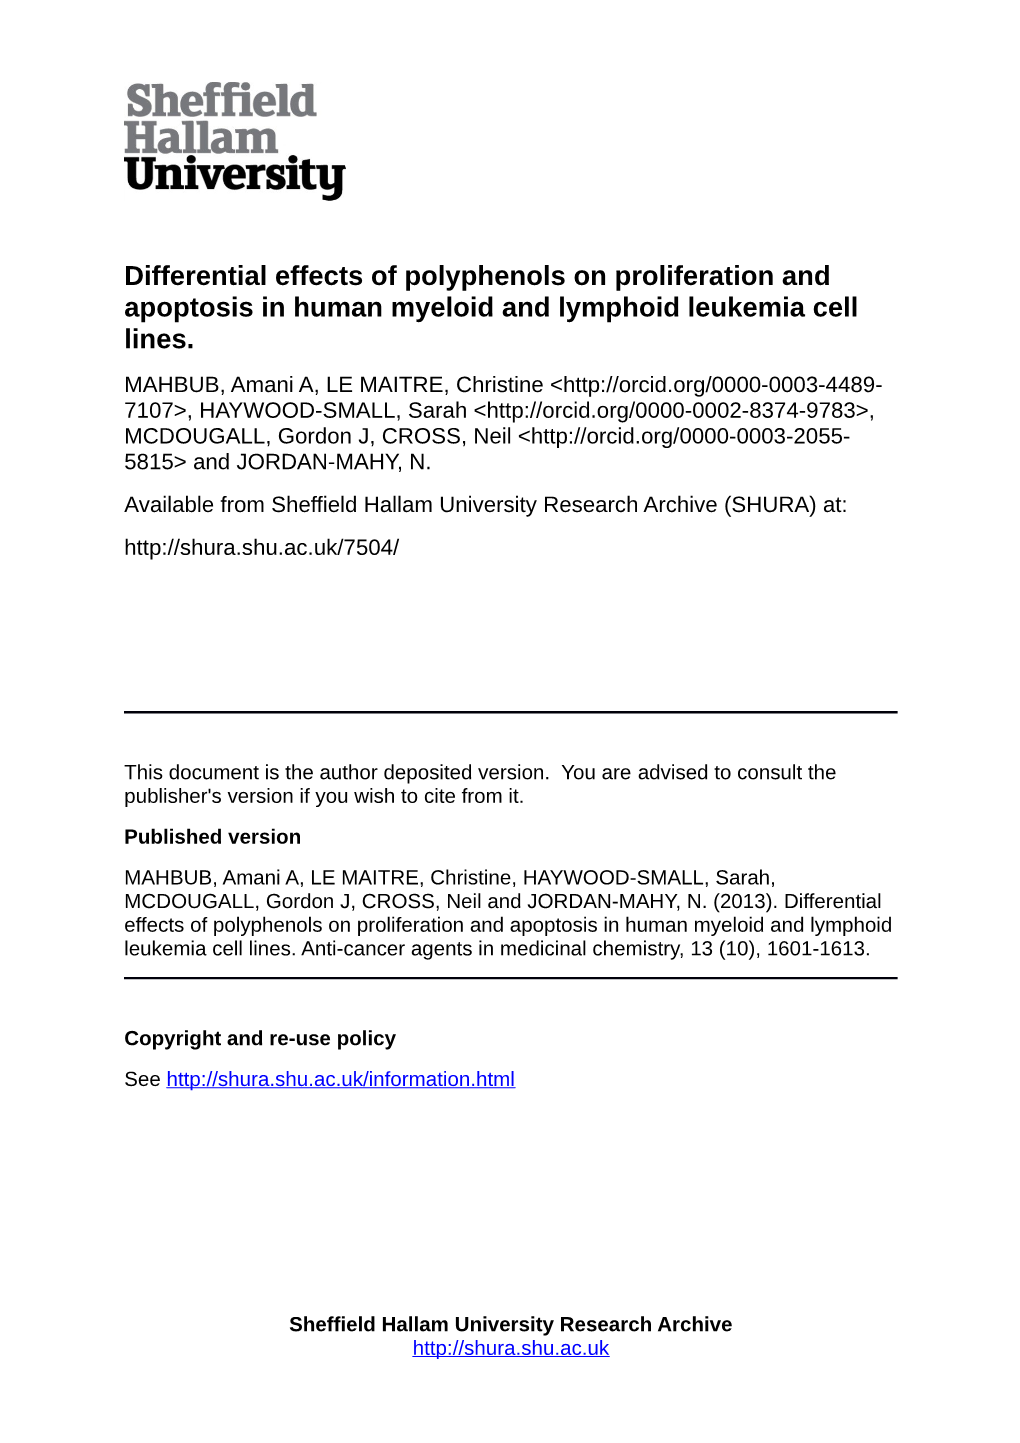 Differential Effects of Polyphenols on Proliferation and Apoptosis in Human Myeloid and Lymphoid Leukemia Cell Lines